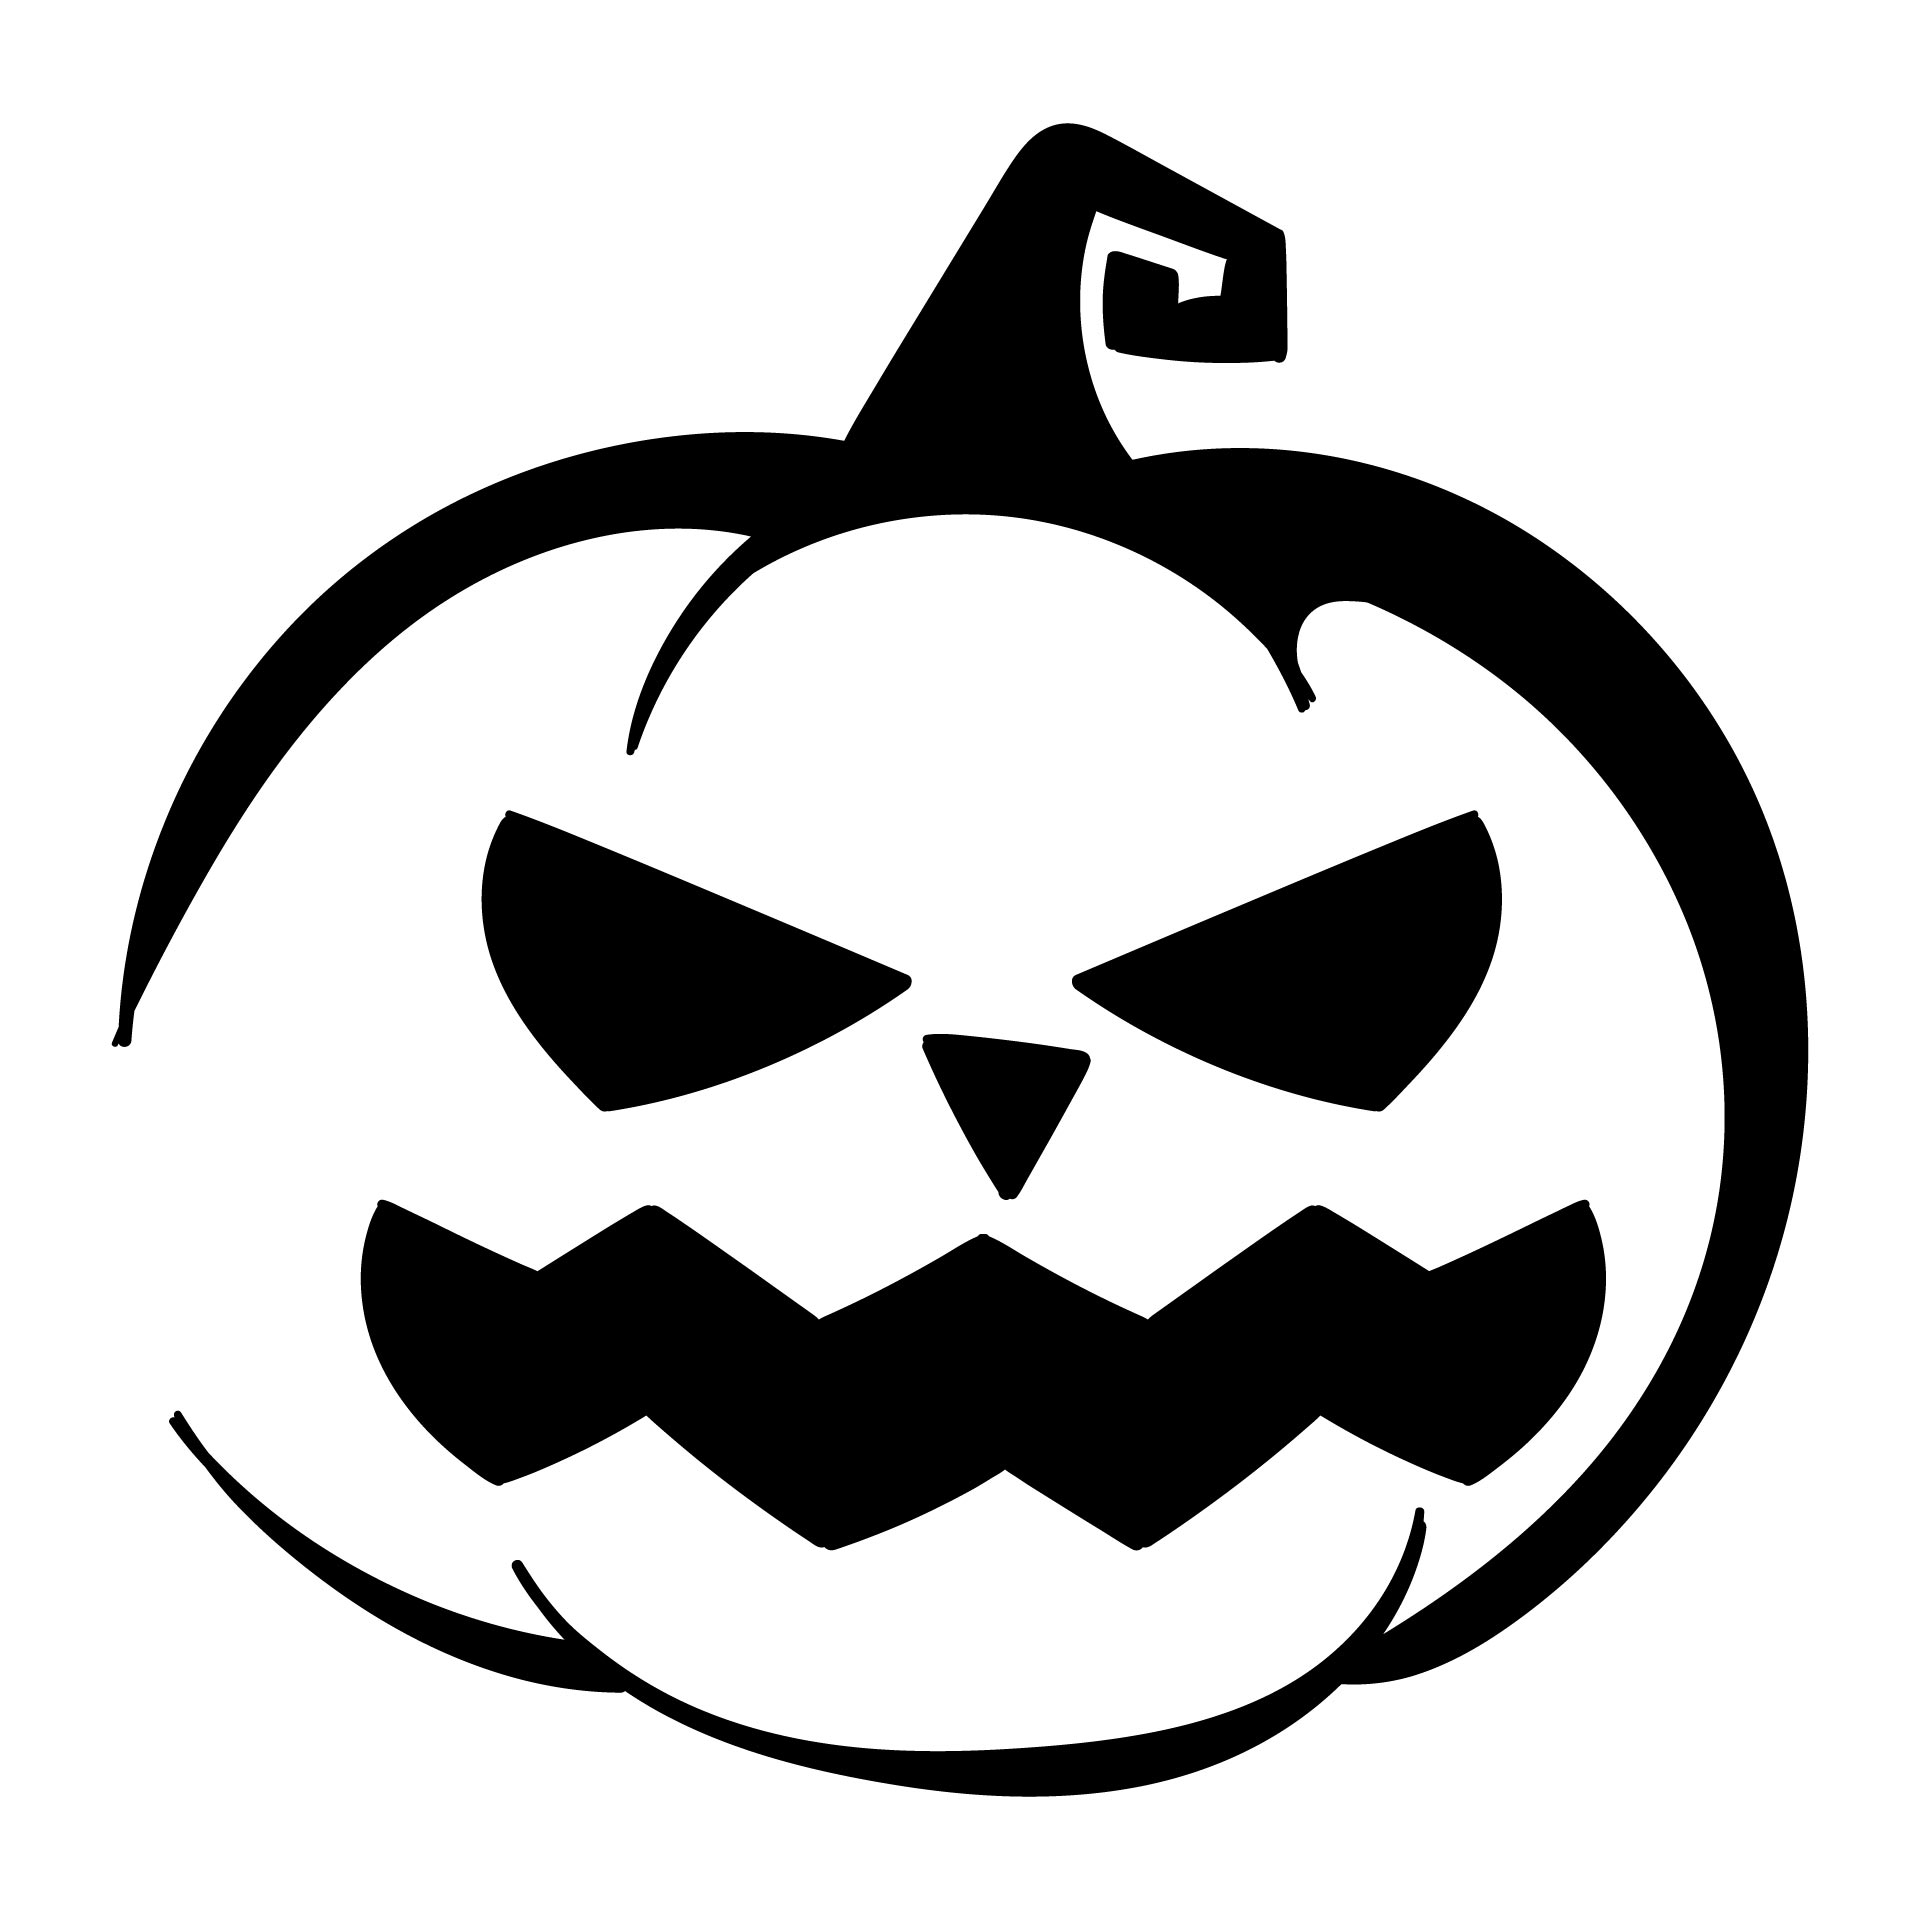 7 Best Images of Printable Halloween Templates And Patterns - Halloween ...